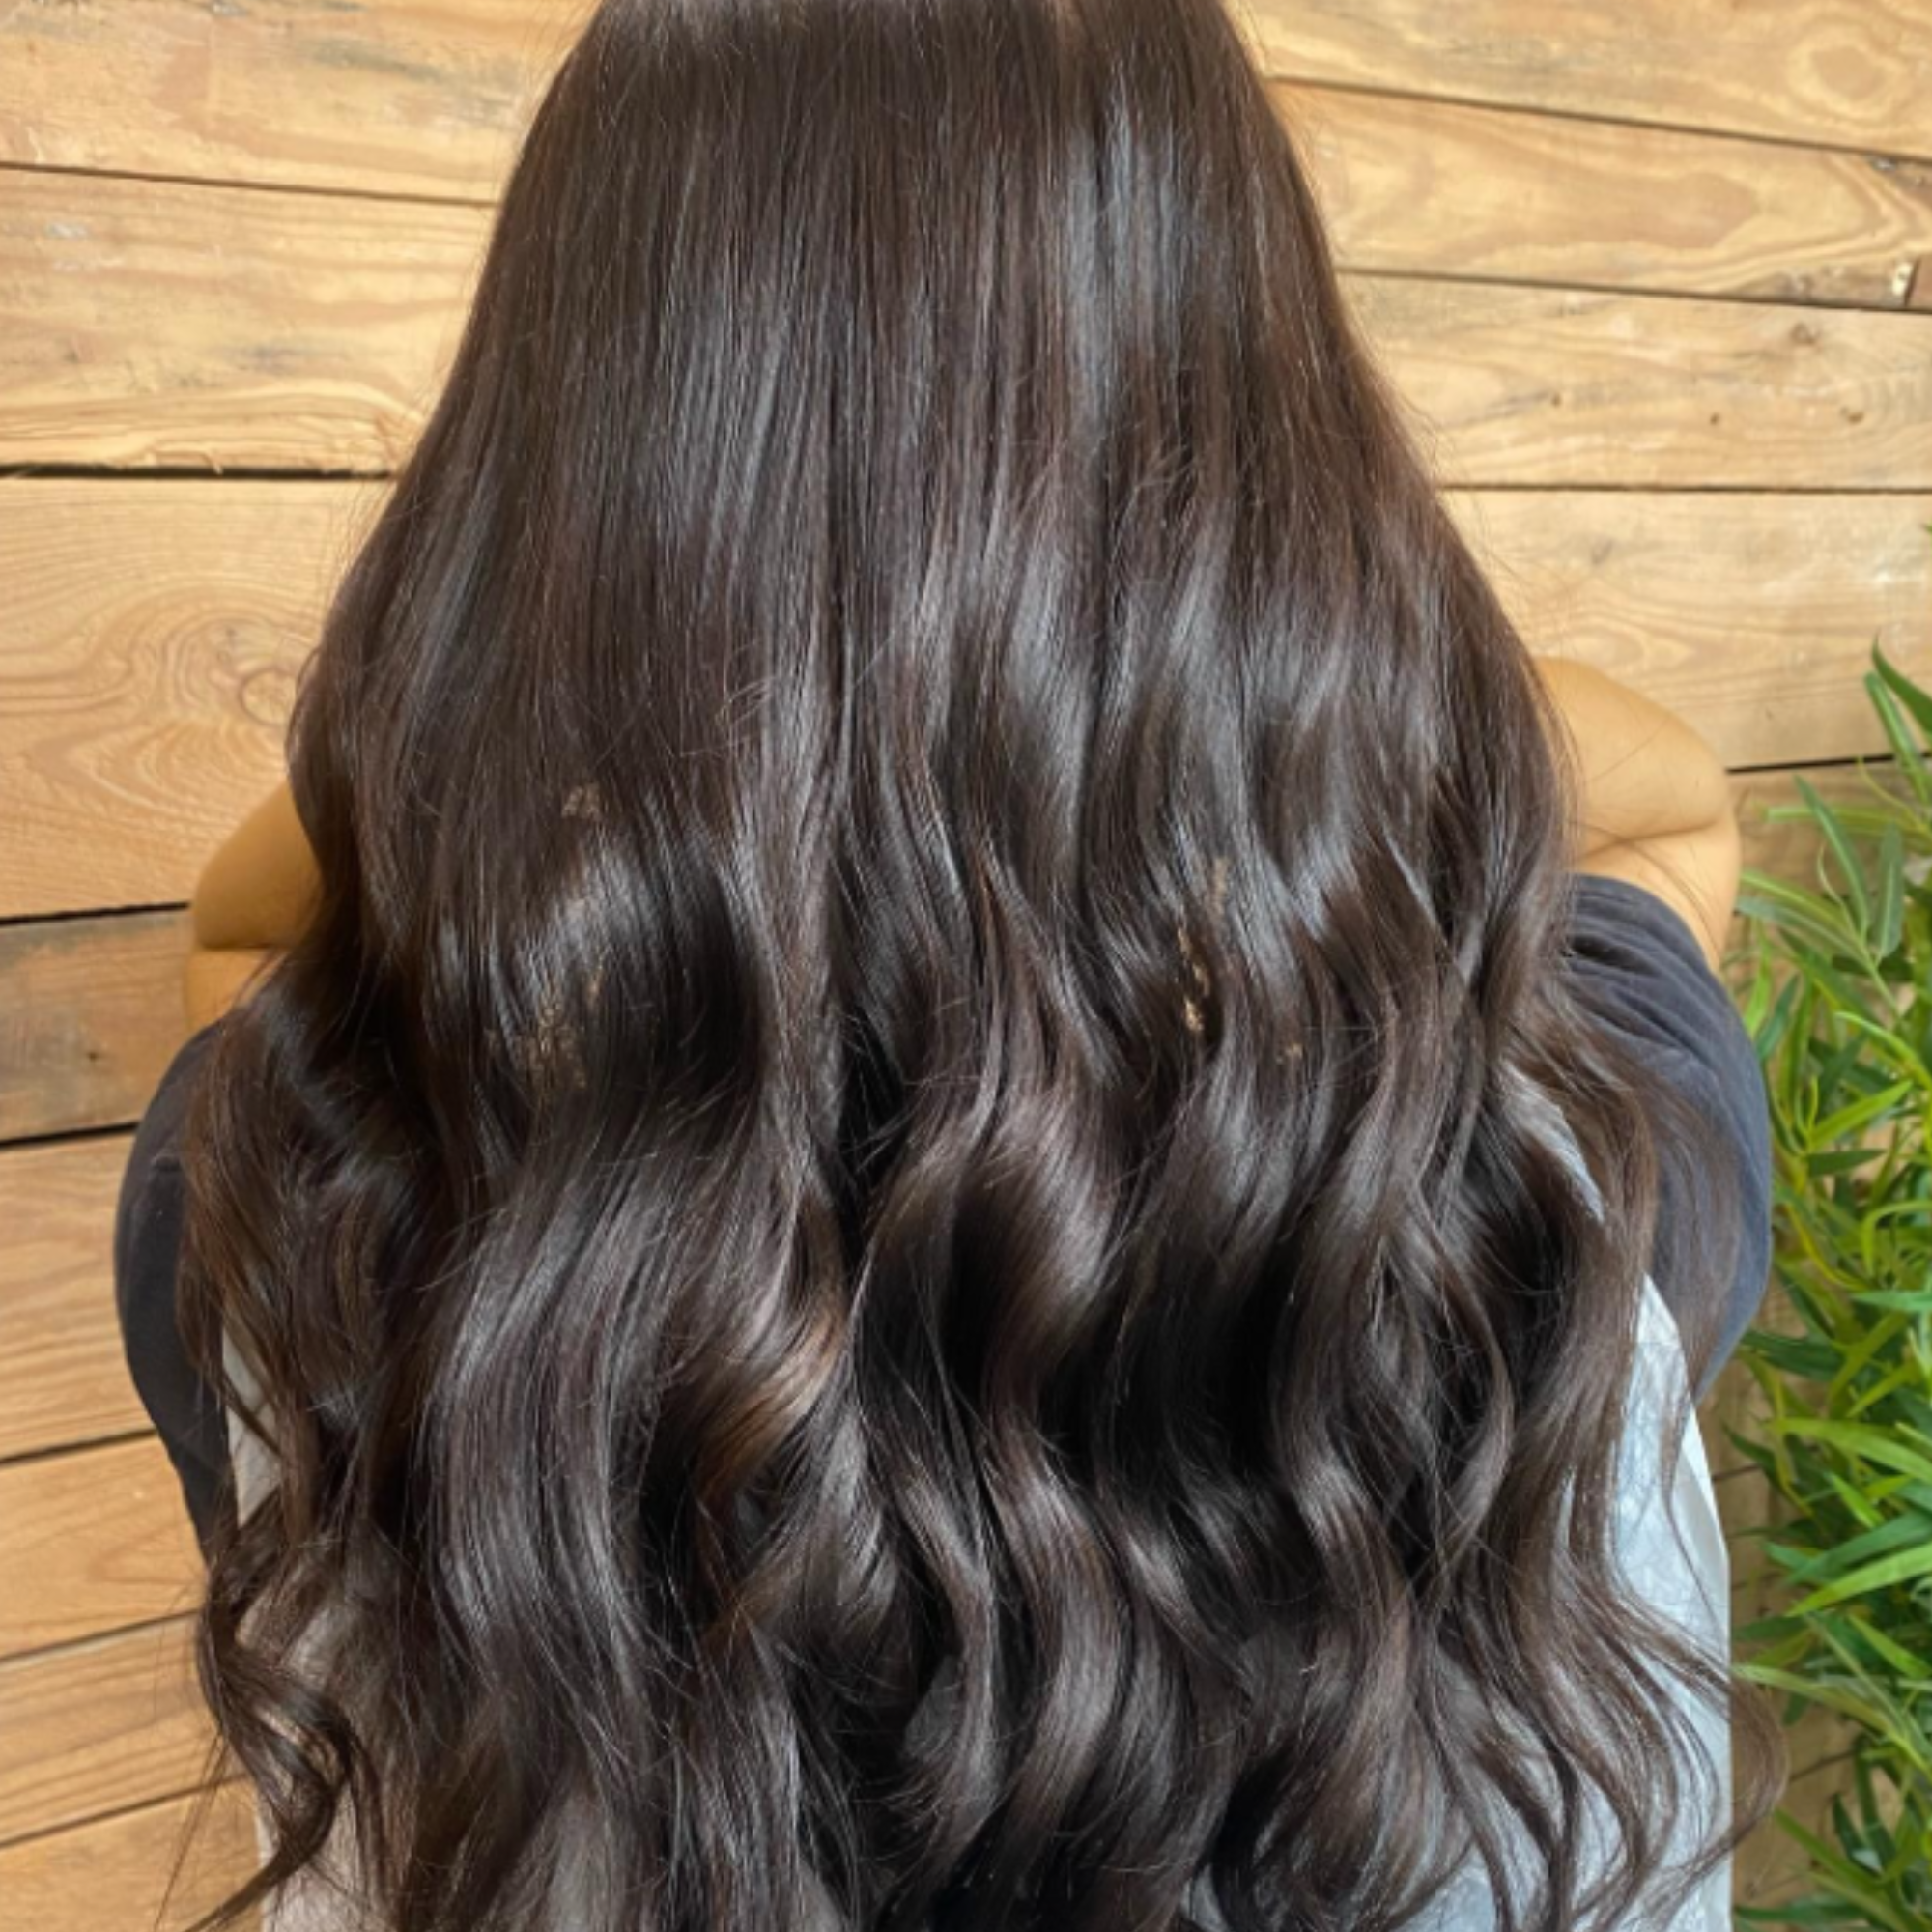 "customer wearing hair rehab london 20 inch luxe clip-in hair extensions in brunette shade"